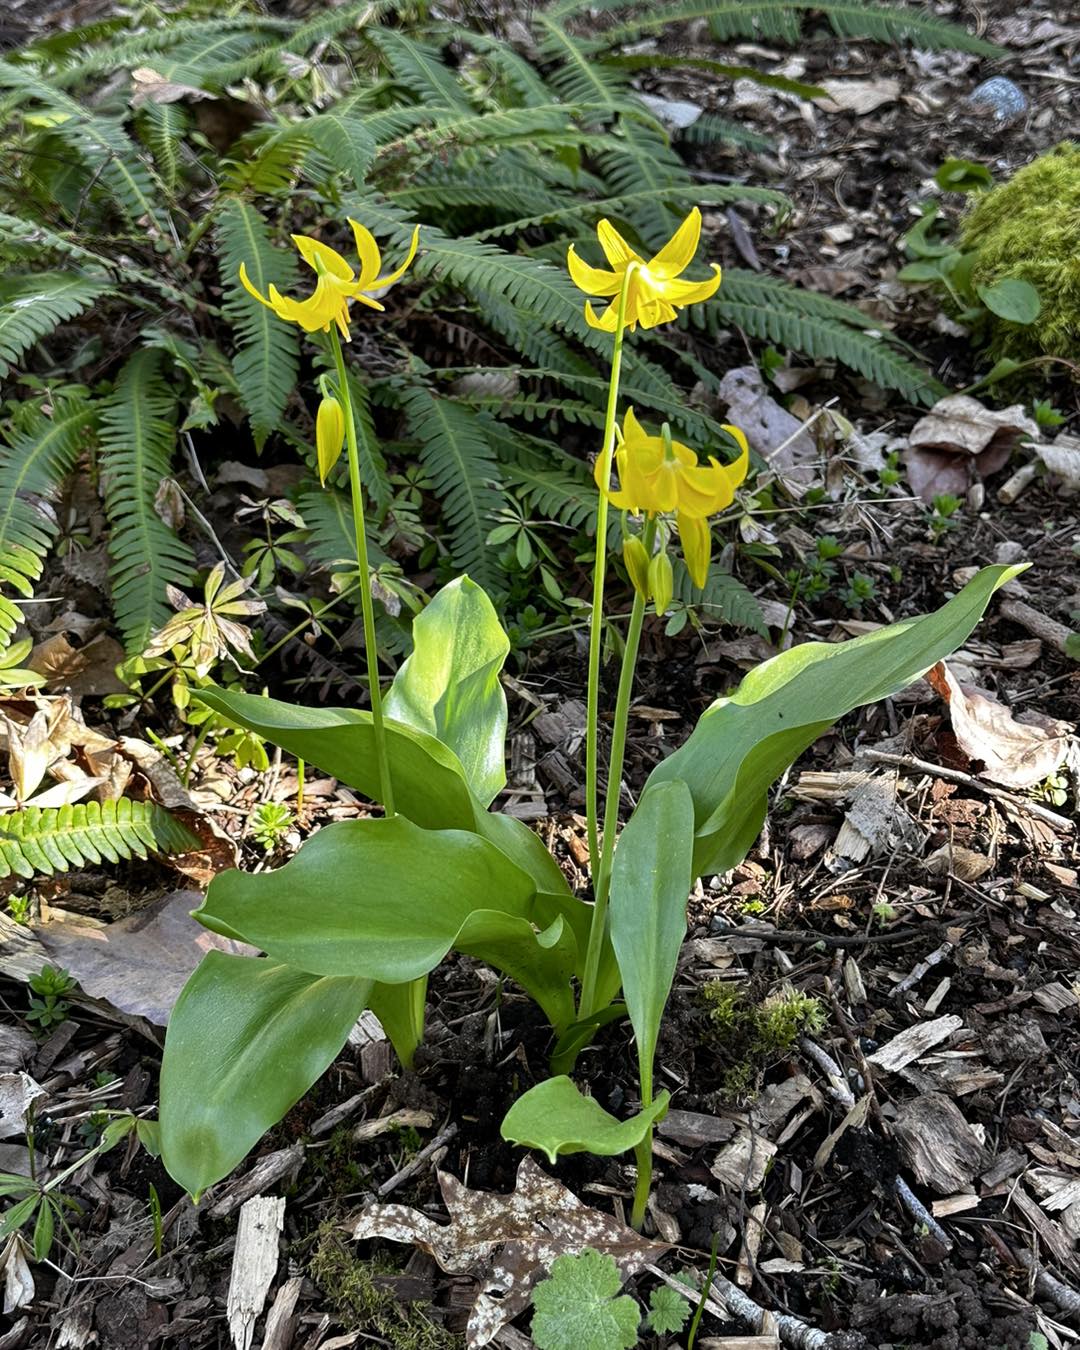 A photo of a trout lily in a mixed garden bed with sword ferns, mosses, and soil covered i leaf mould mulch. Its deep green, glossy leaves, which begin in a unique rosebud-like cluster. Each stem can grow to 12" and produces 3-5  lily-like flowers which hang facing down. The yellow blooms have pointed petals that curve upwards to reveal long, yellow stamens. 